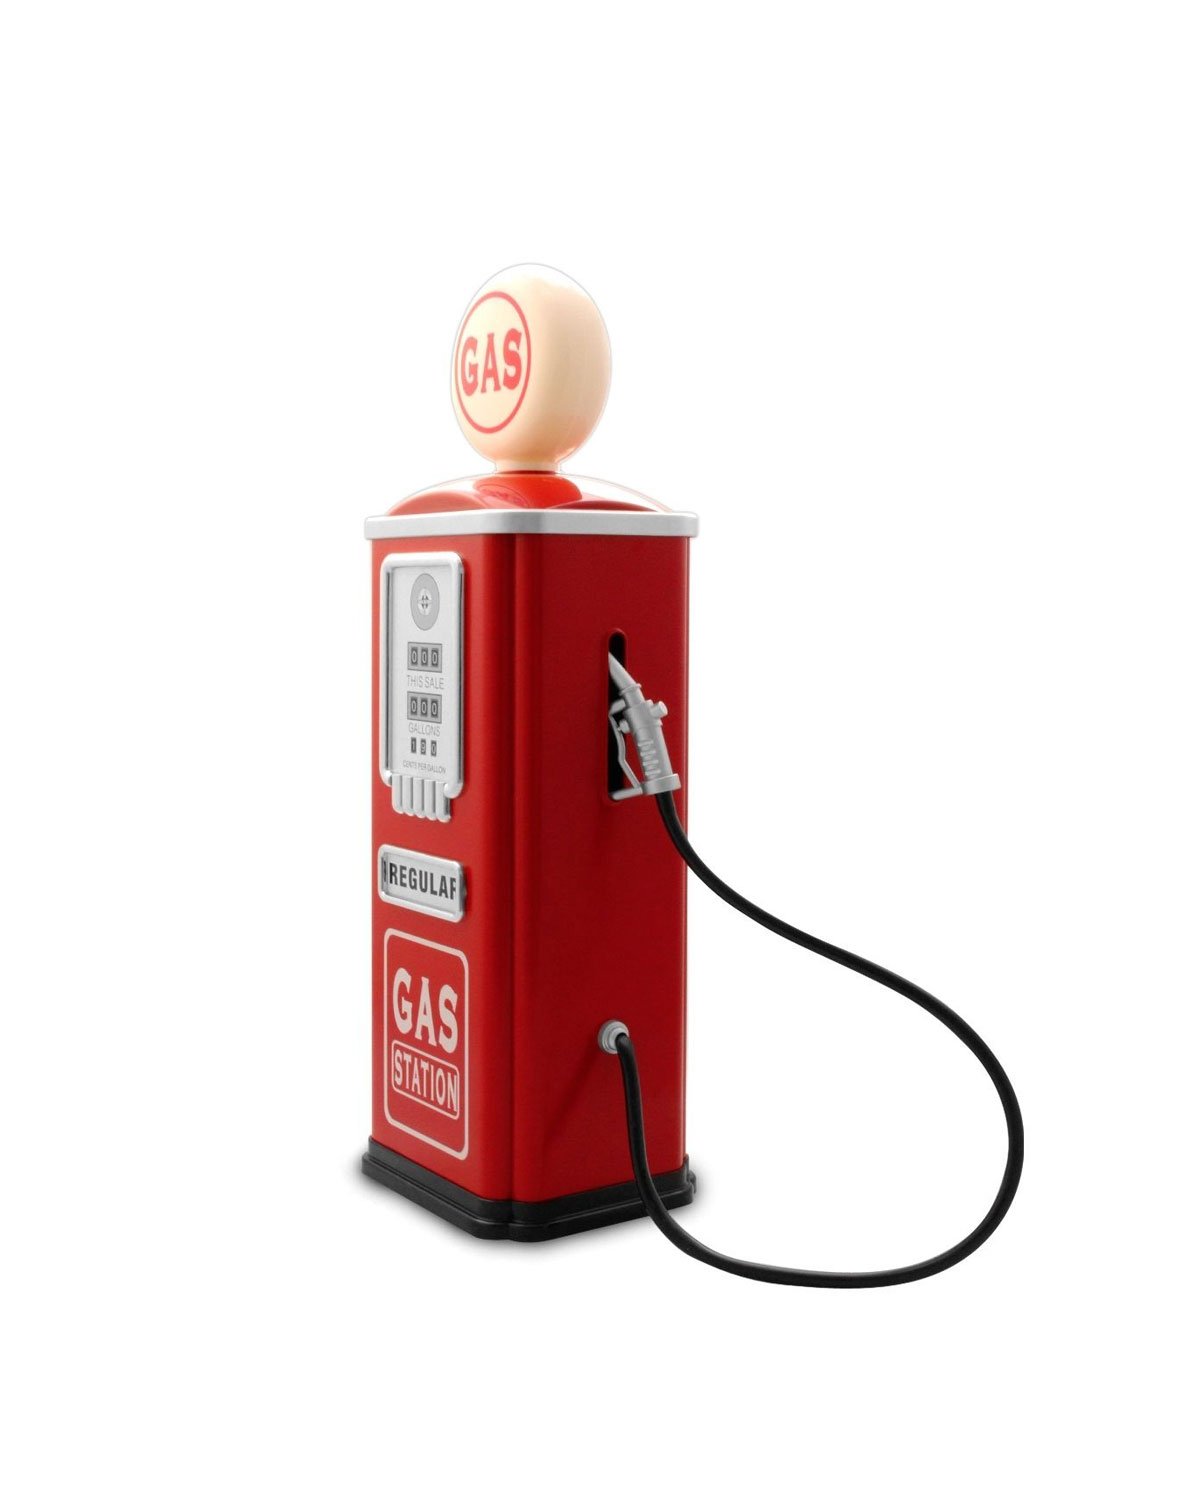 Vici Baghera Play Gas Station Pump Kids Toy, Ages 3+ Years